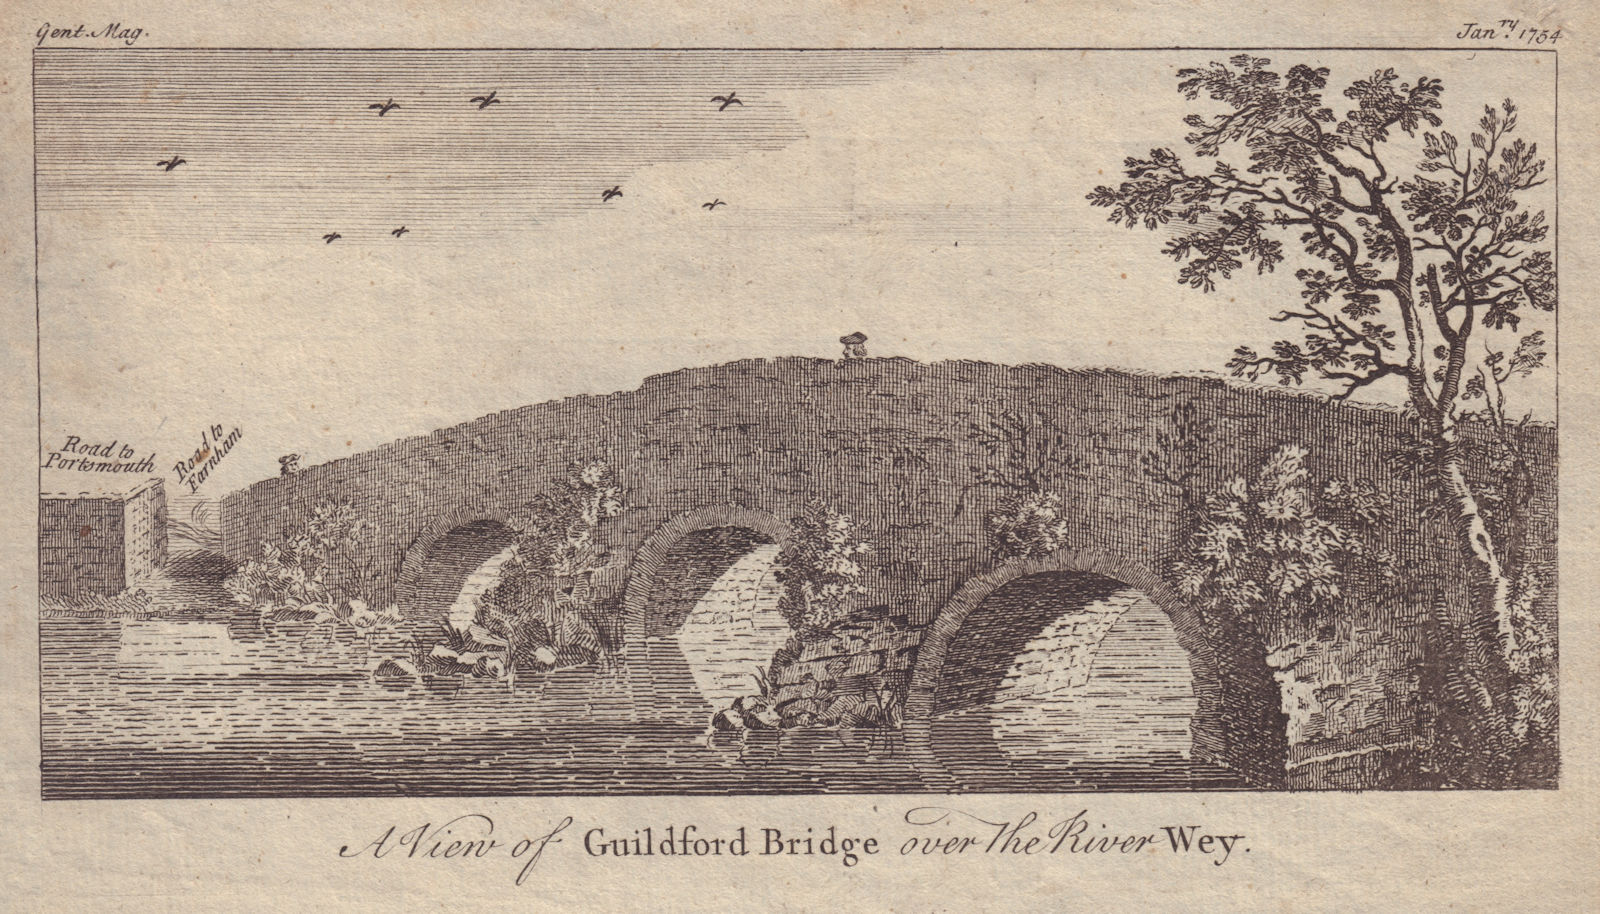 A View of Guildford Bridge over the River Wey. Surrey. GENTS MAG 1754 print